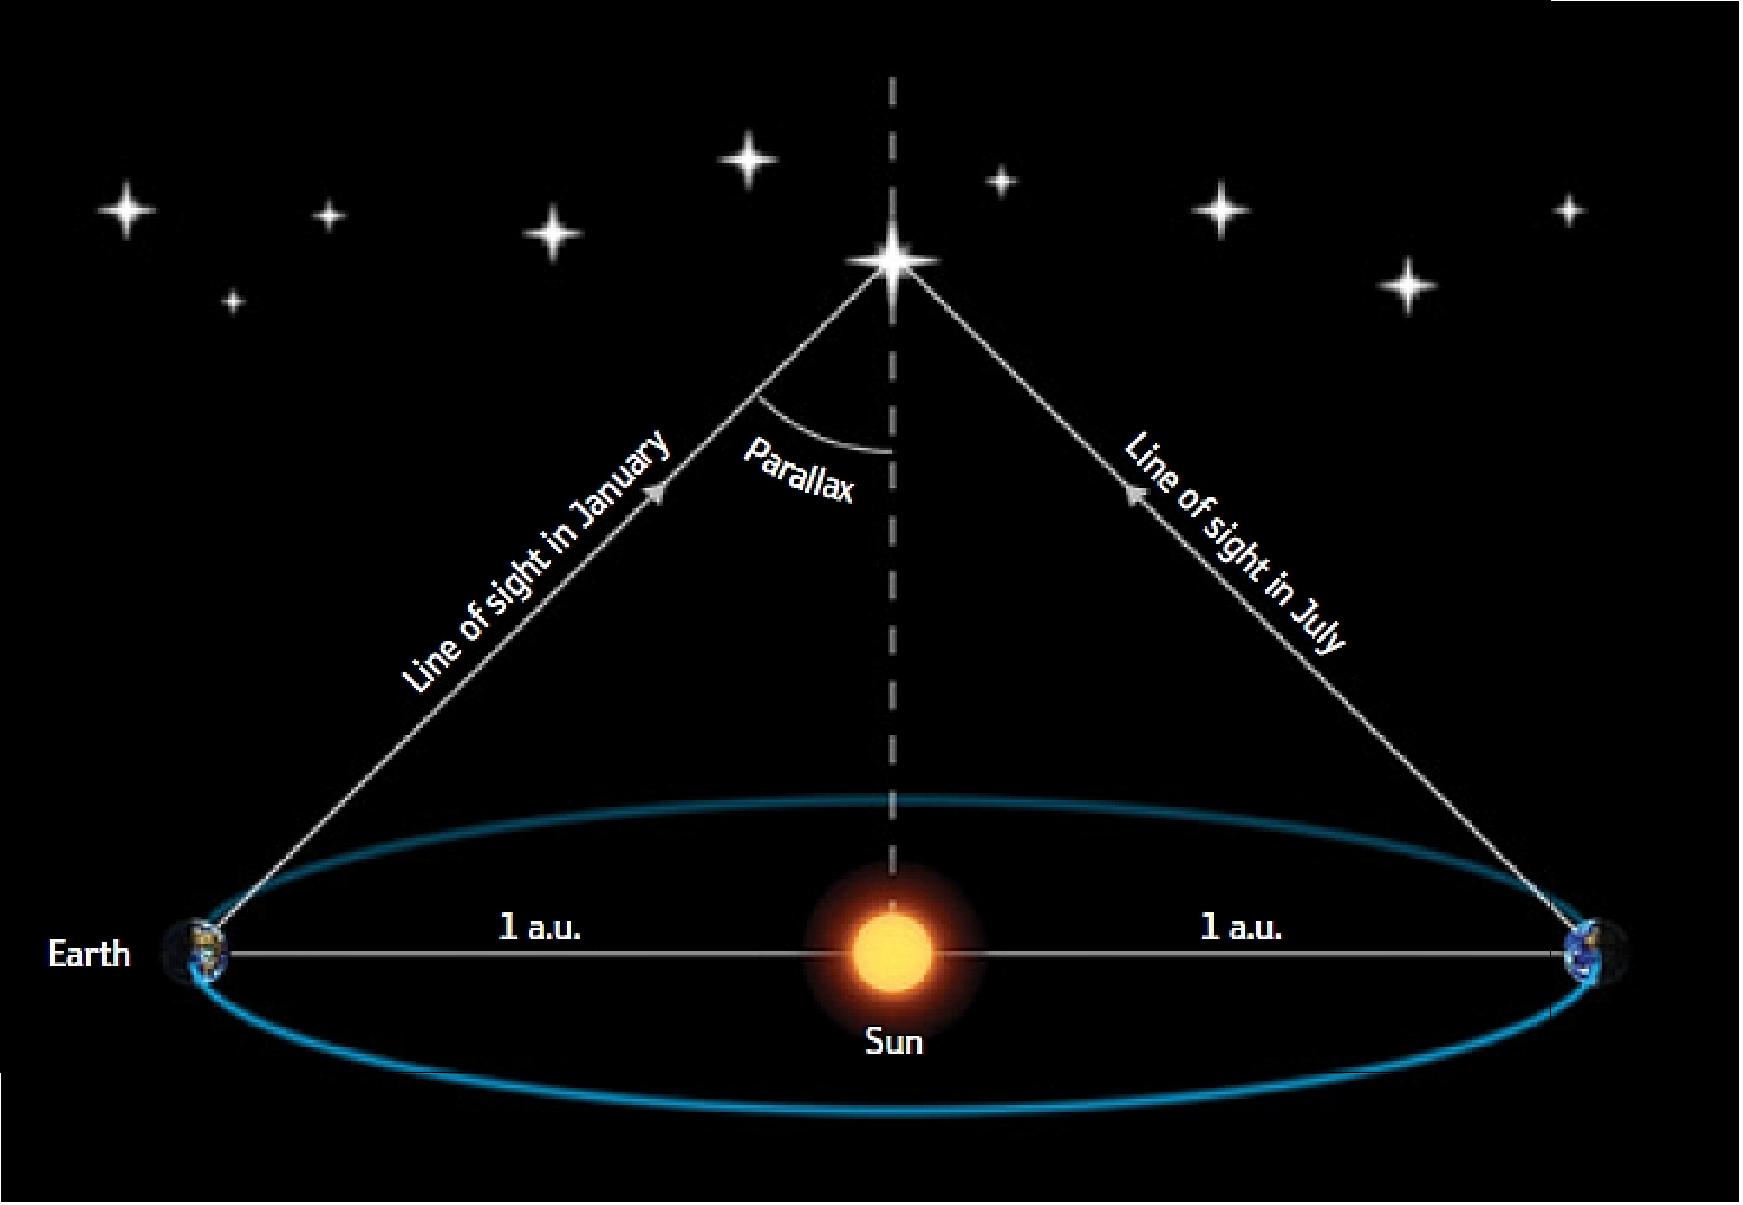 Figure 2: Distance to a star can be calculated with simple trigonometry from the measured parallax angle (1 a.u. is 1 Astronomical Unit, or 149.6 million km), image credit: ESA/Medialab